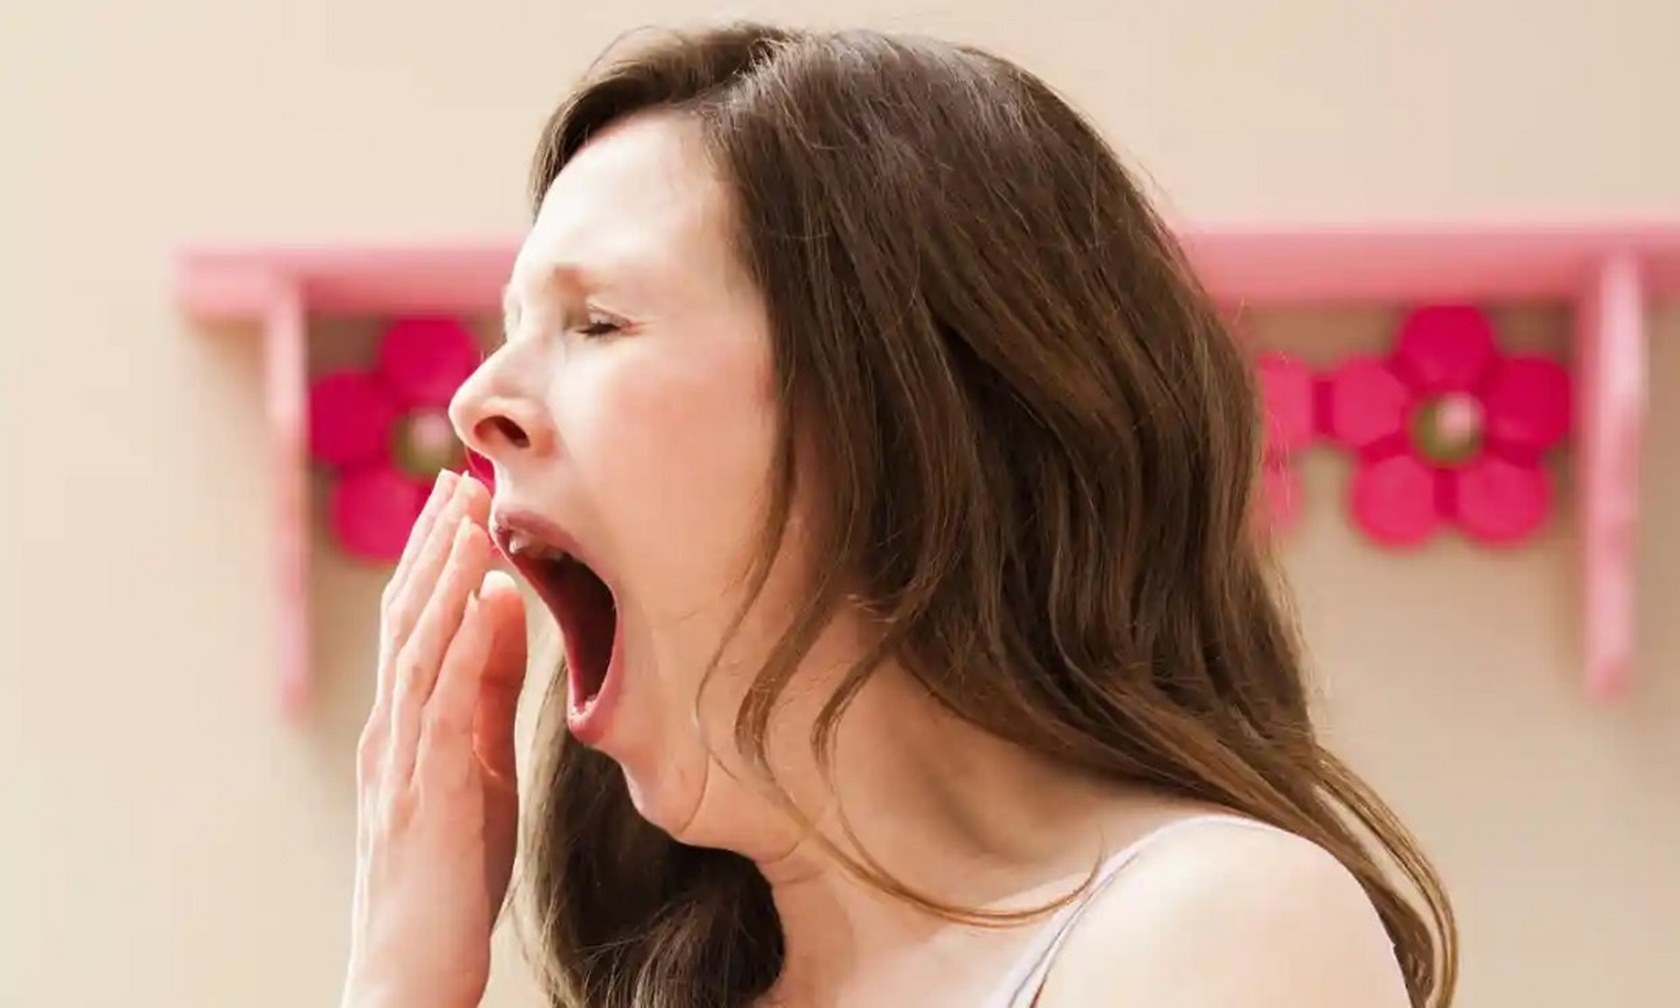 How excessive yawning may signal an oncoming heart attack, according to some